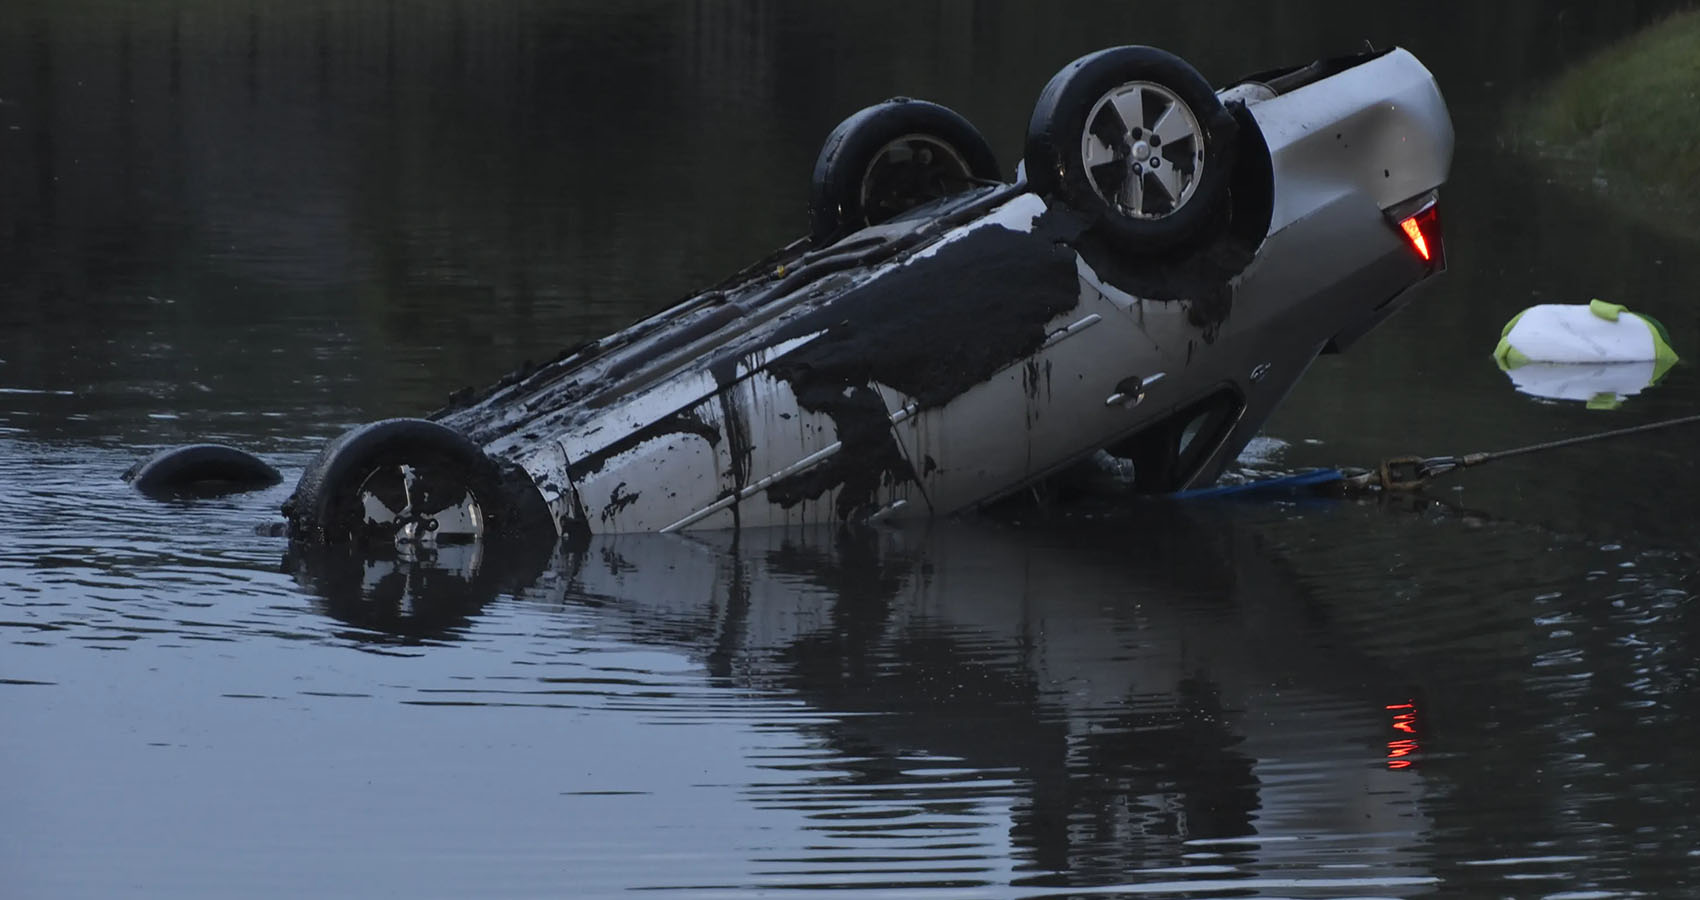 urban legends that turned out to be true - car crashes in water